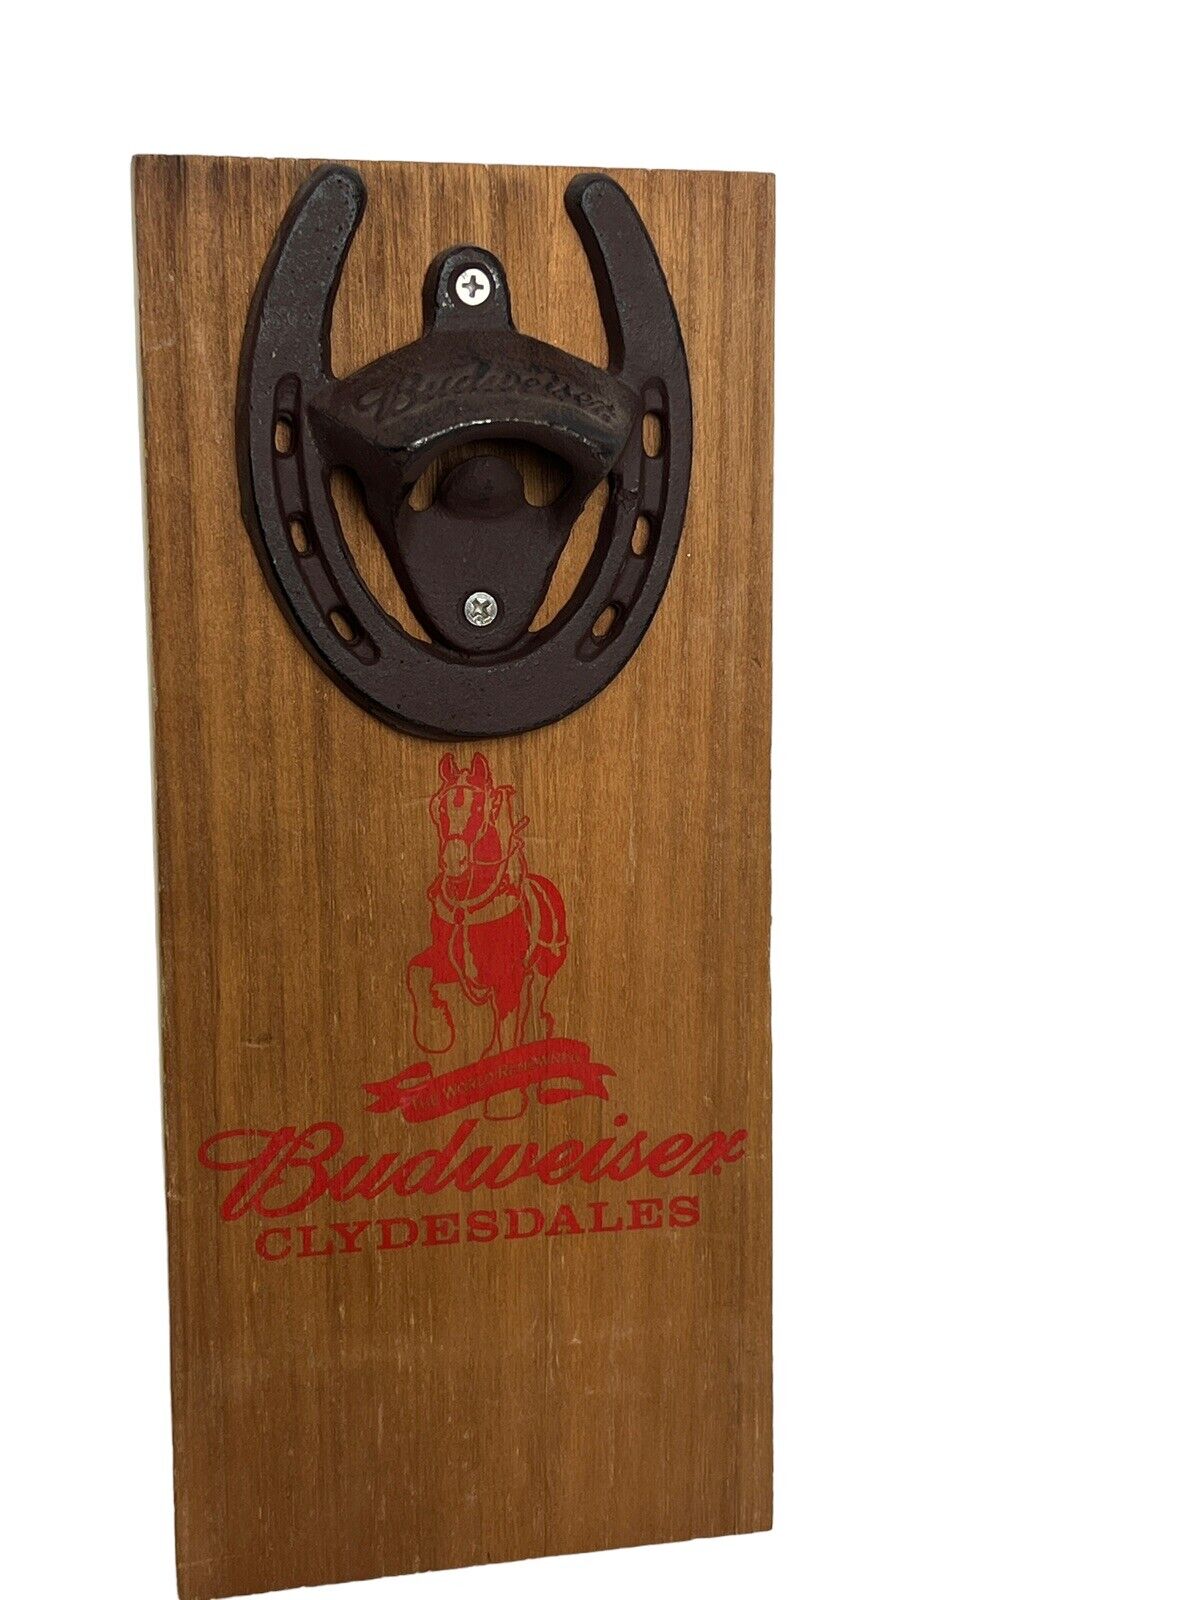 Budweiser Clydesdales Horseshoe Wall Mount Bottle Opener